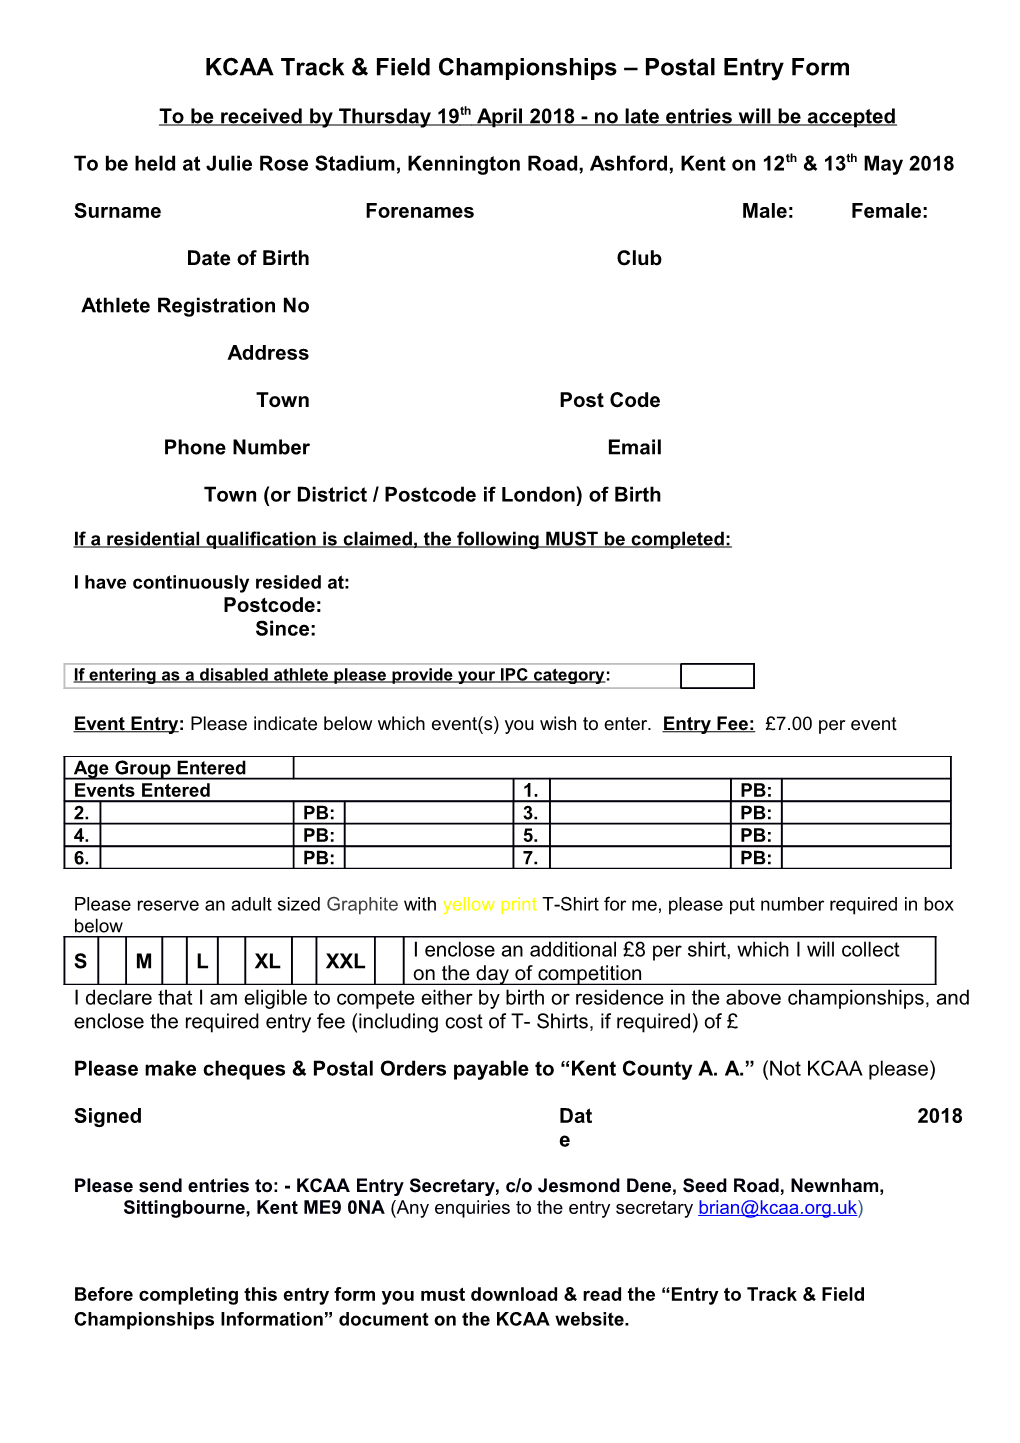 KCAA Track & Field Championships Postal Entry Form